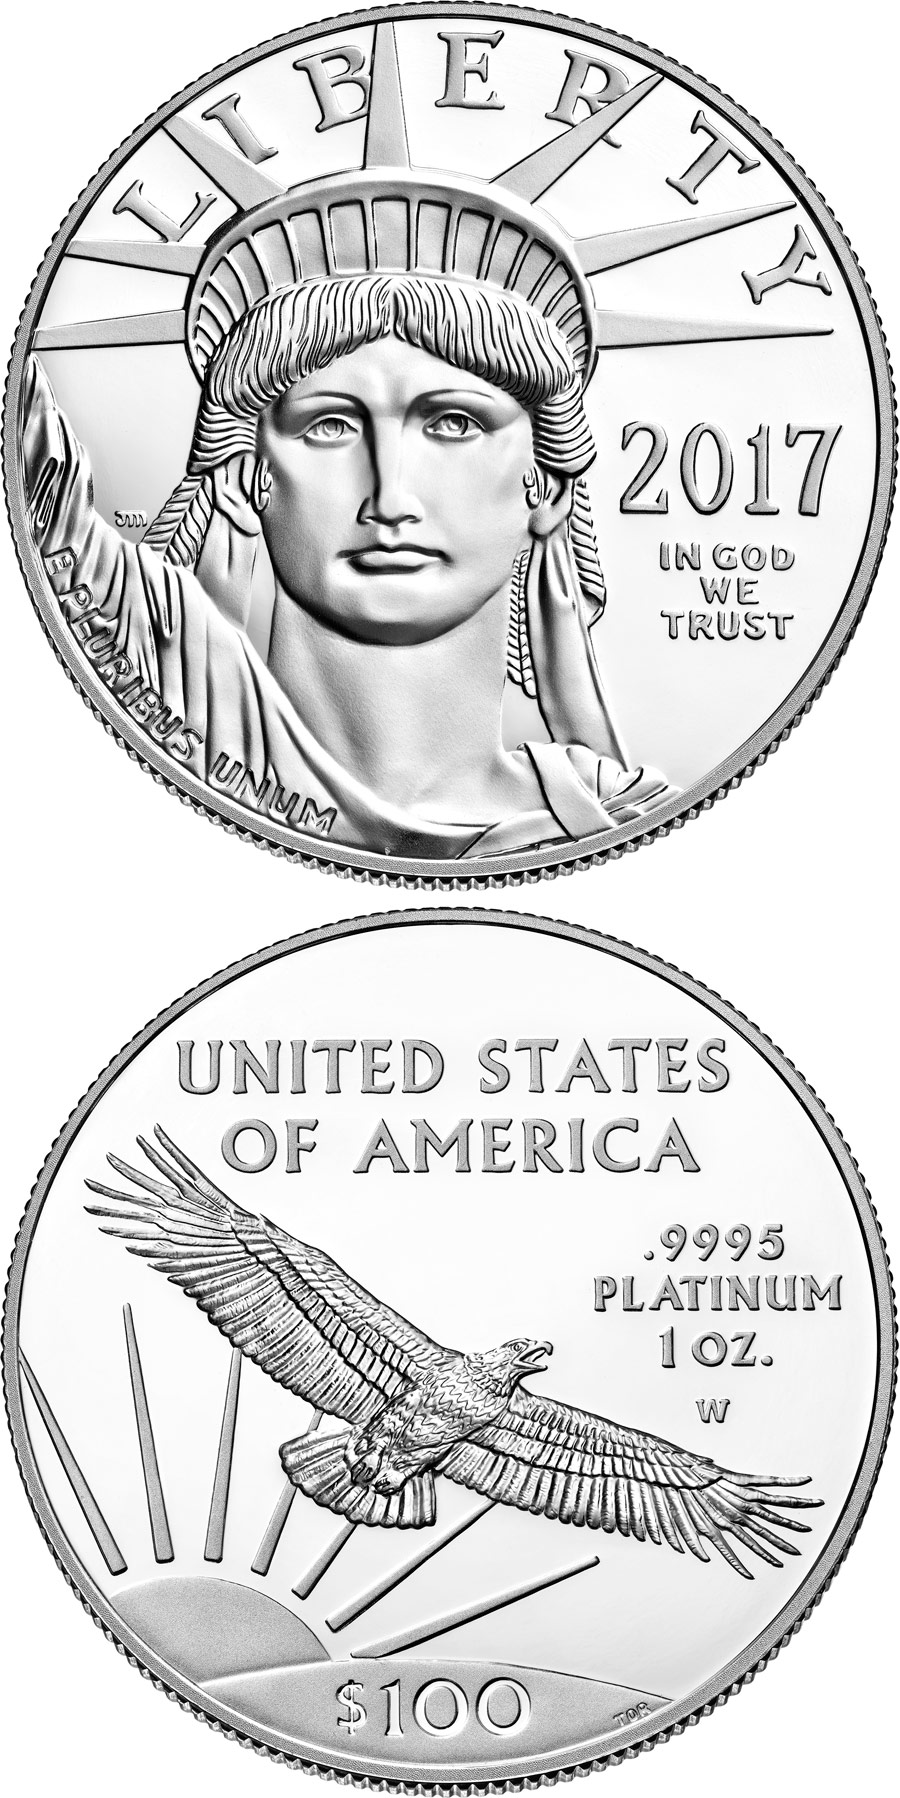 Image of 100 dollars coin - American Eagle Platinum One Ounce Proof Coin | USA 2017